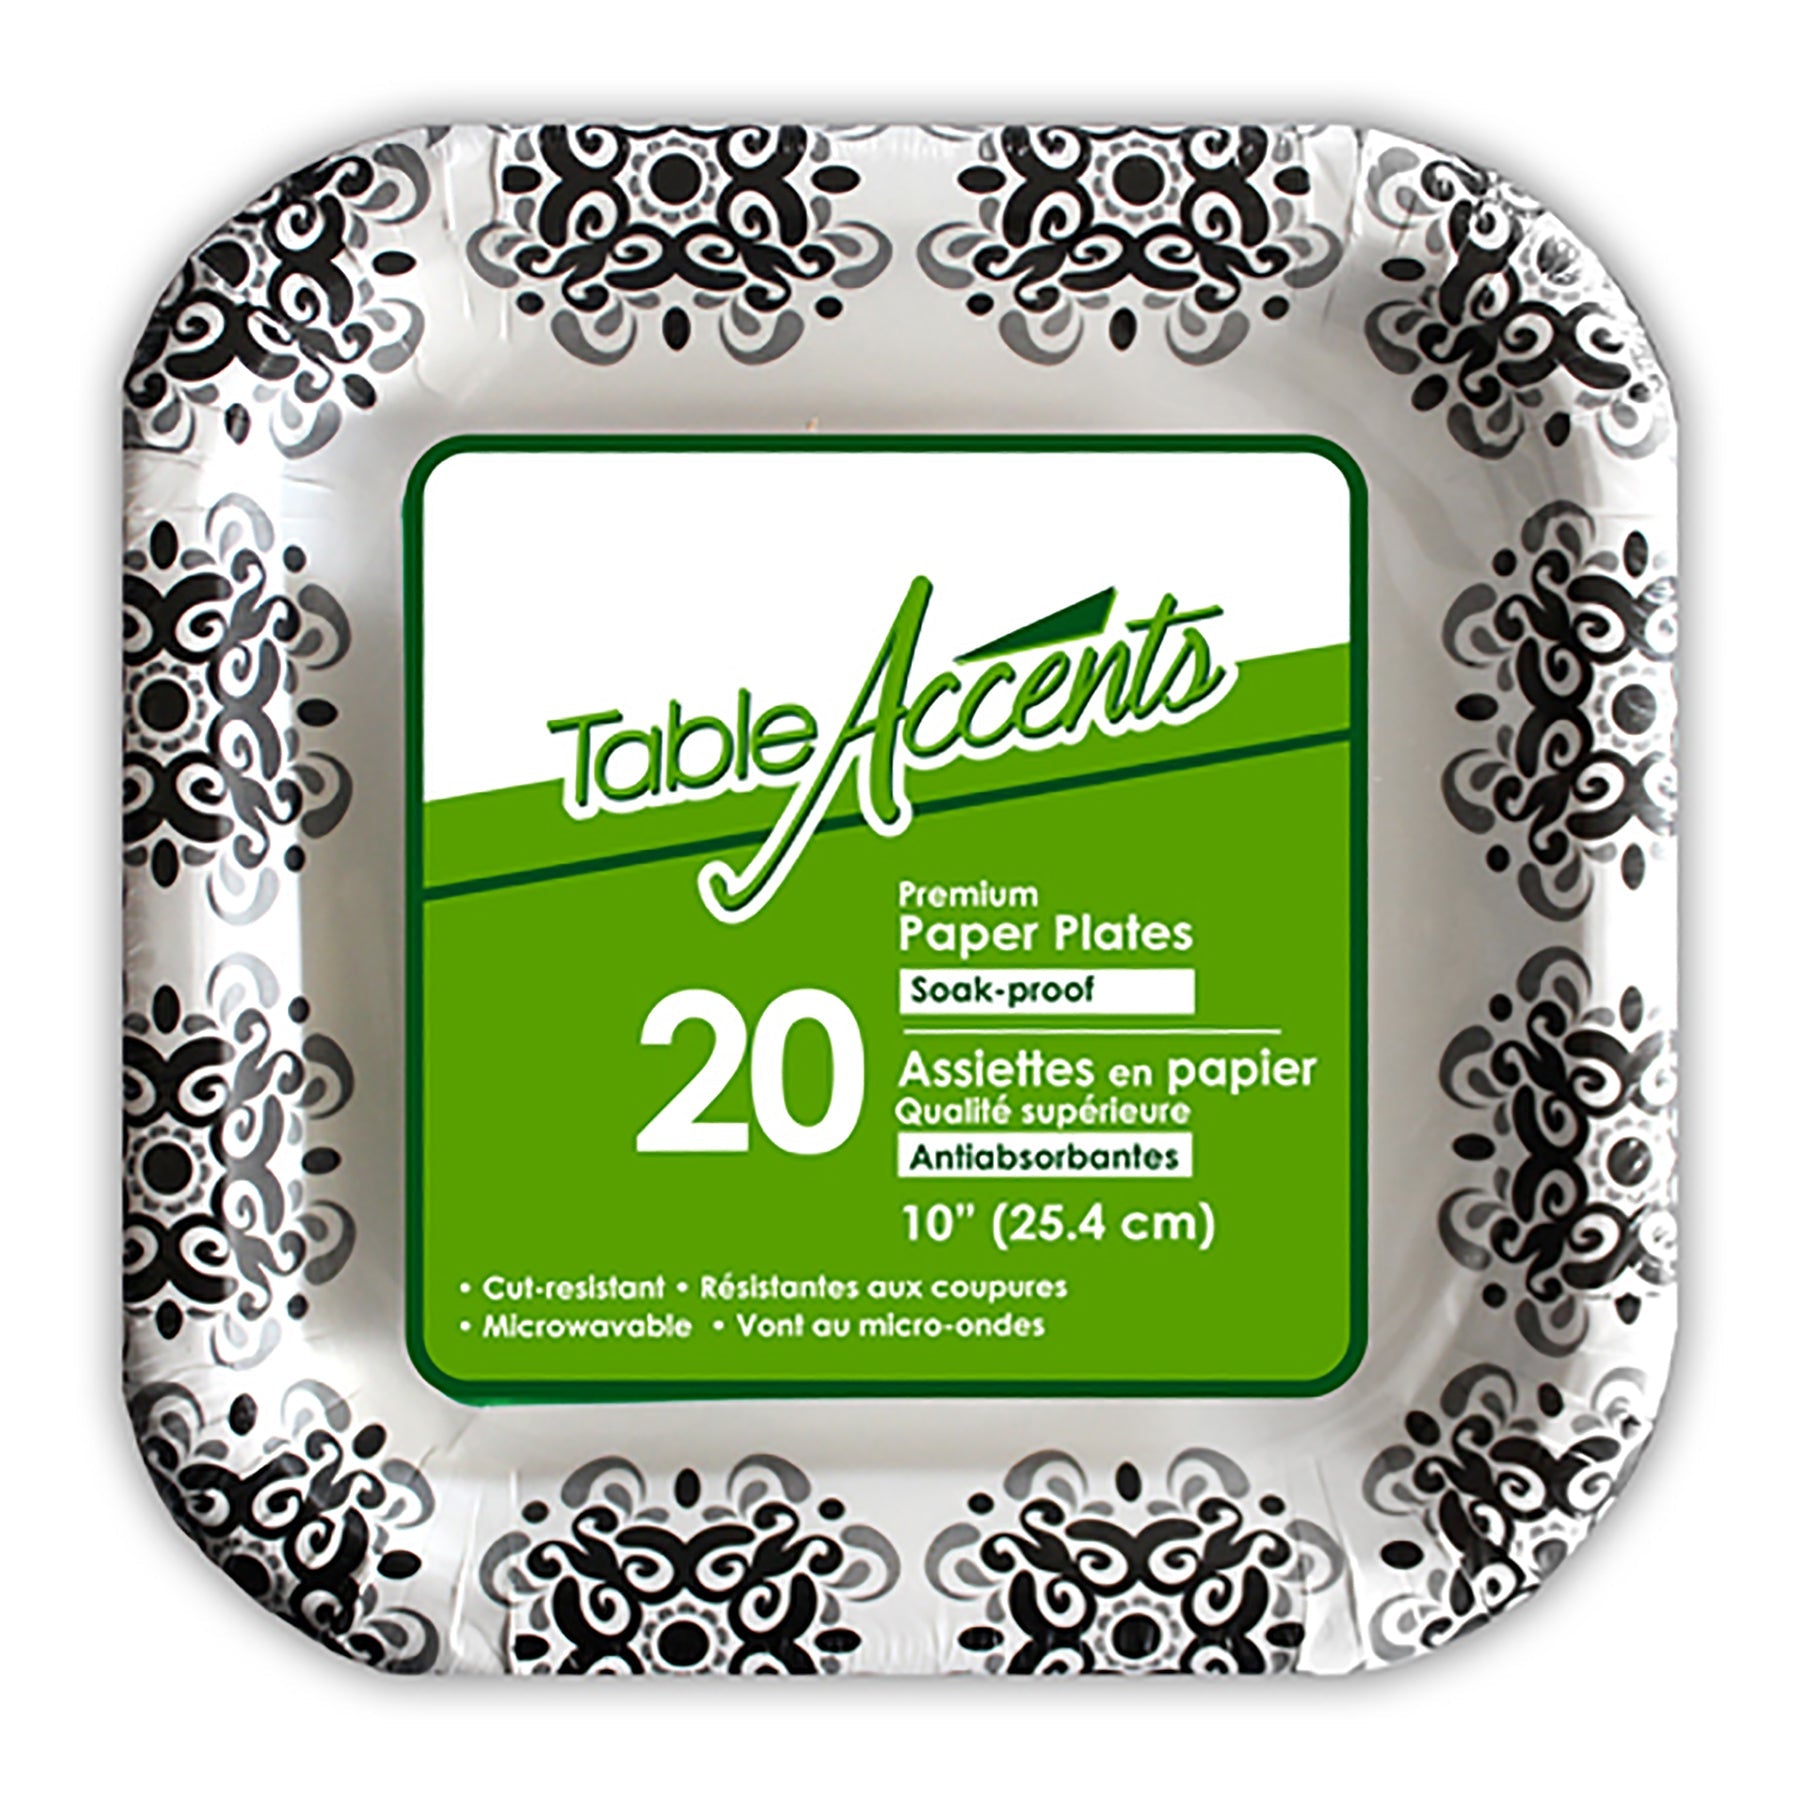 Table Accents 20 Printed Square Paper Plates 10in